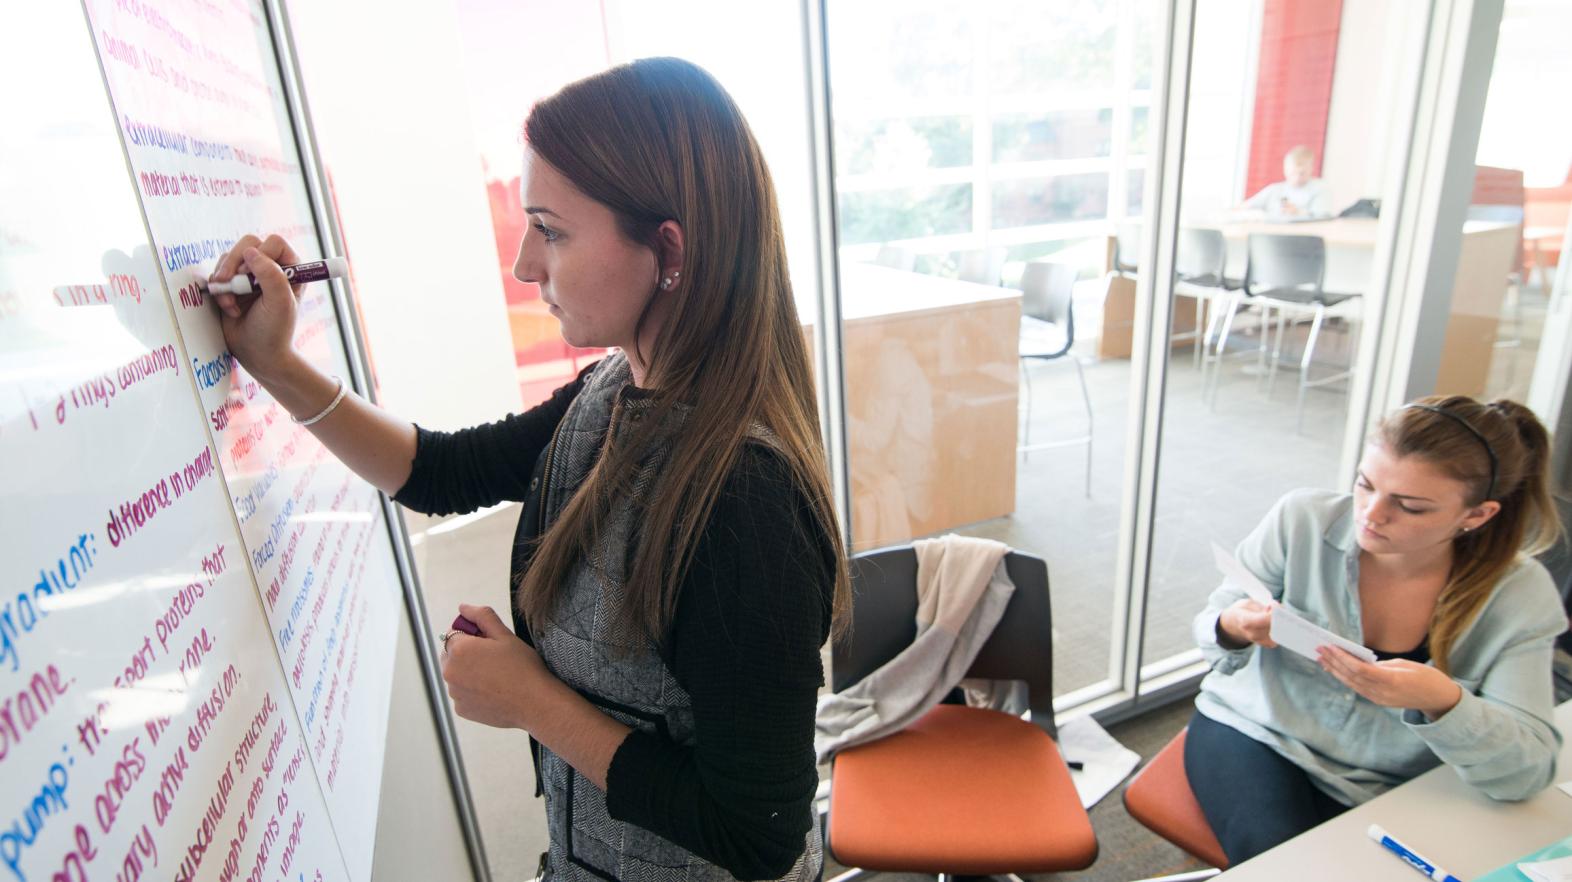 A female student takes notes on the white boards in the learning commons